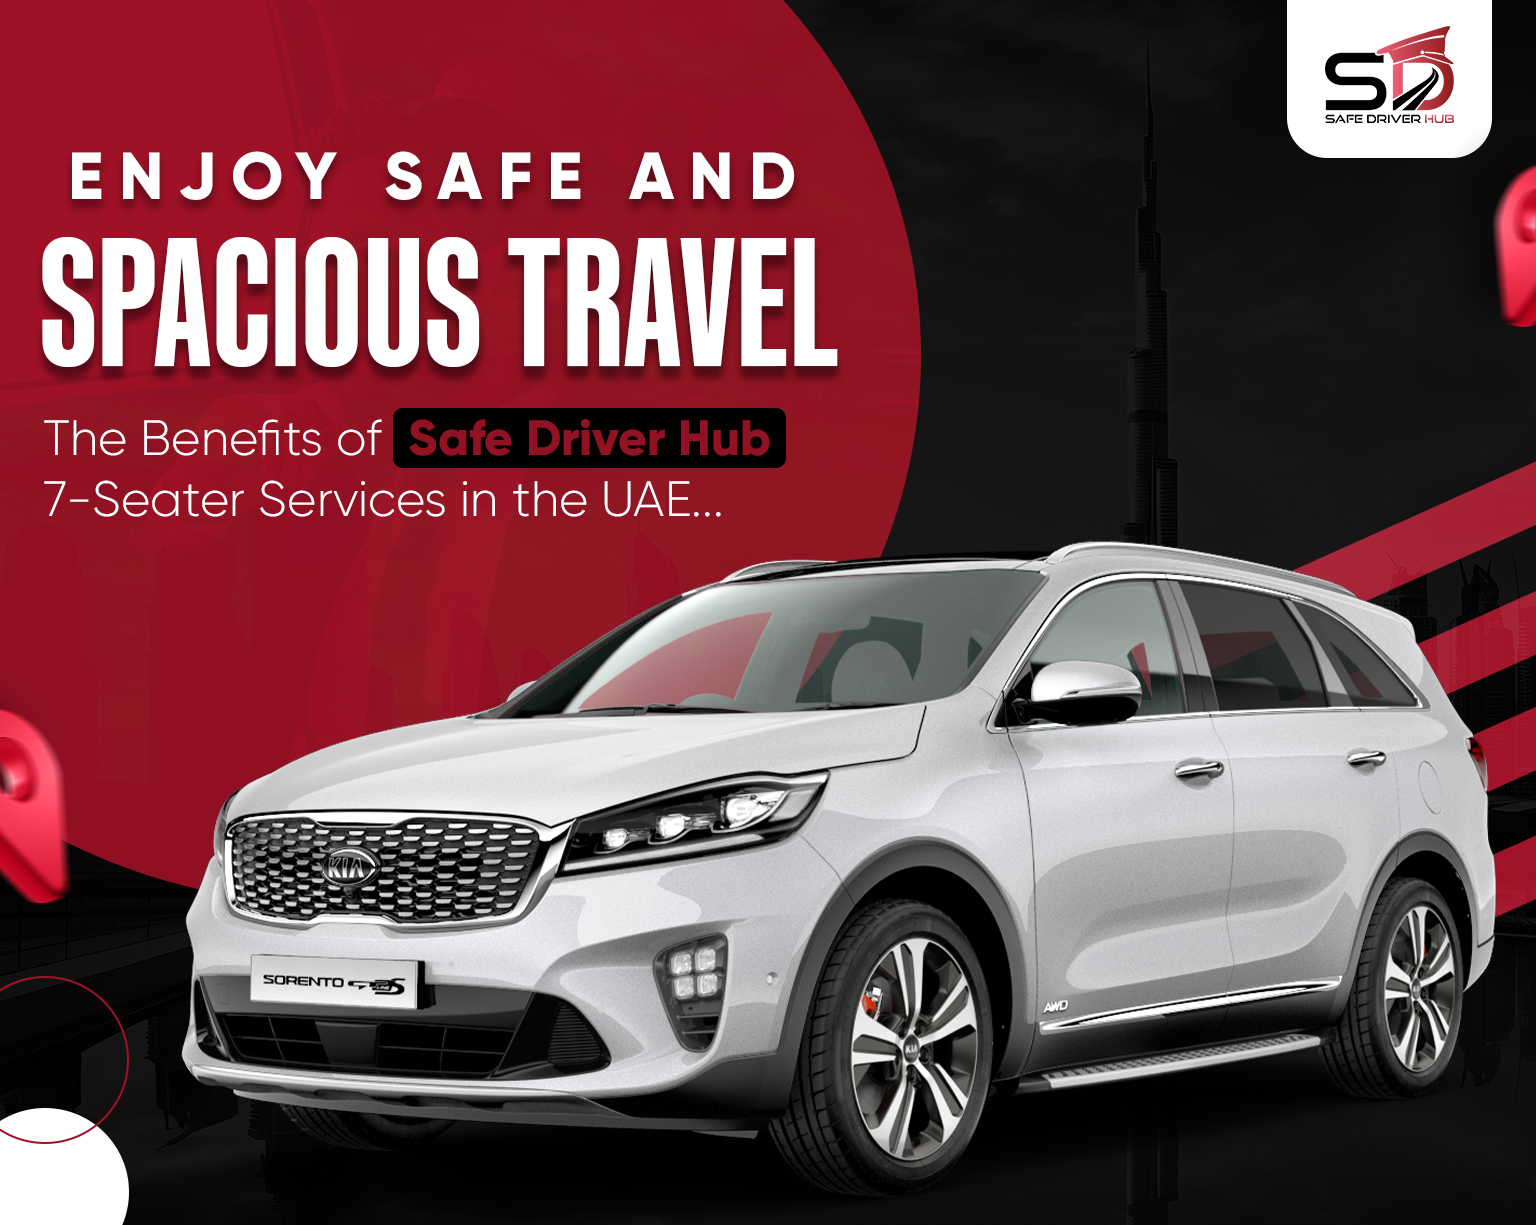 Enjoy-Safe-and-Spacious-Travel-The-Benefits-of-SafeDriver-Hub's-7-Seater-Services-in-the-UAE